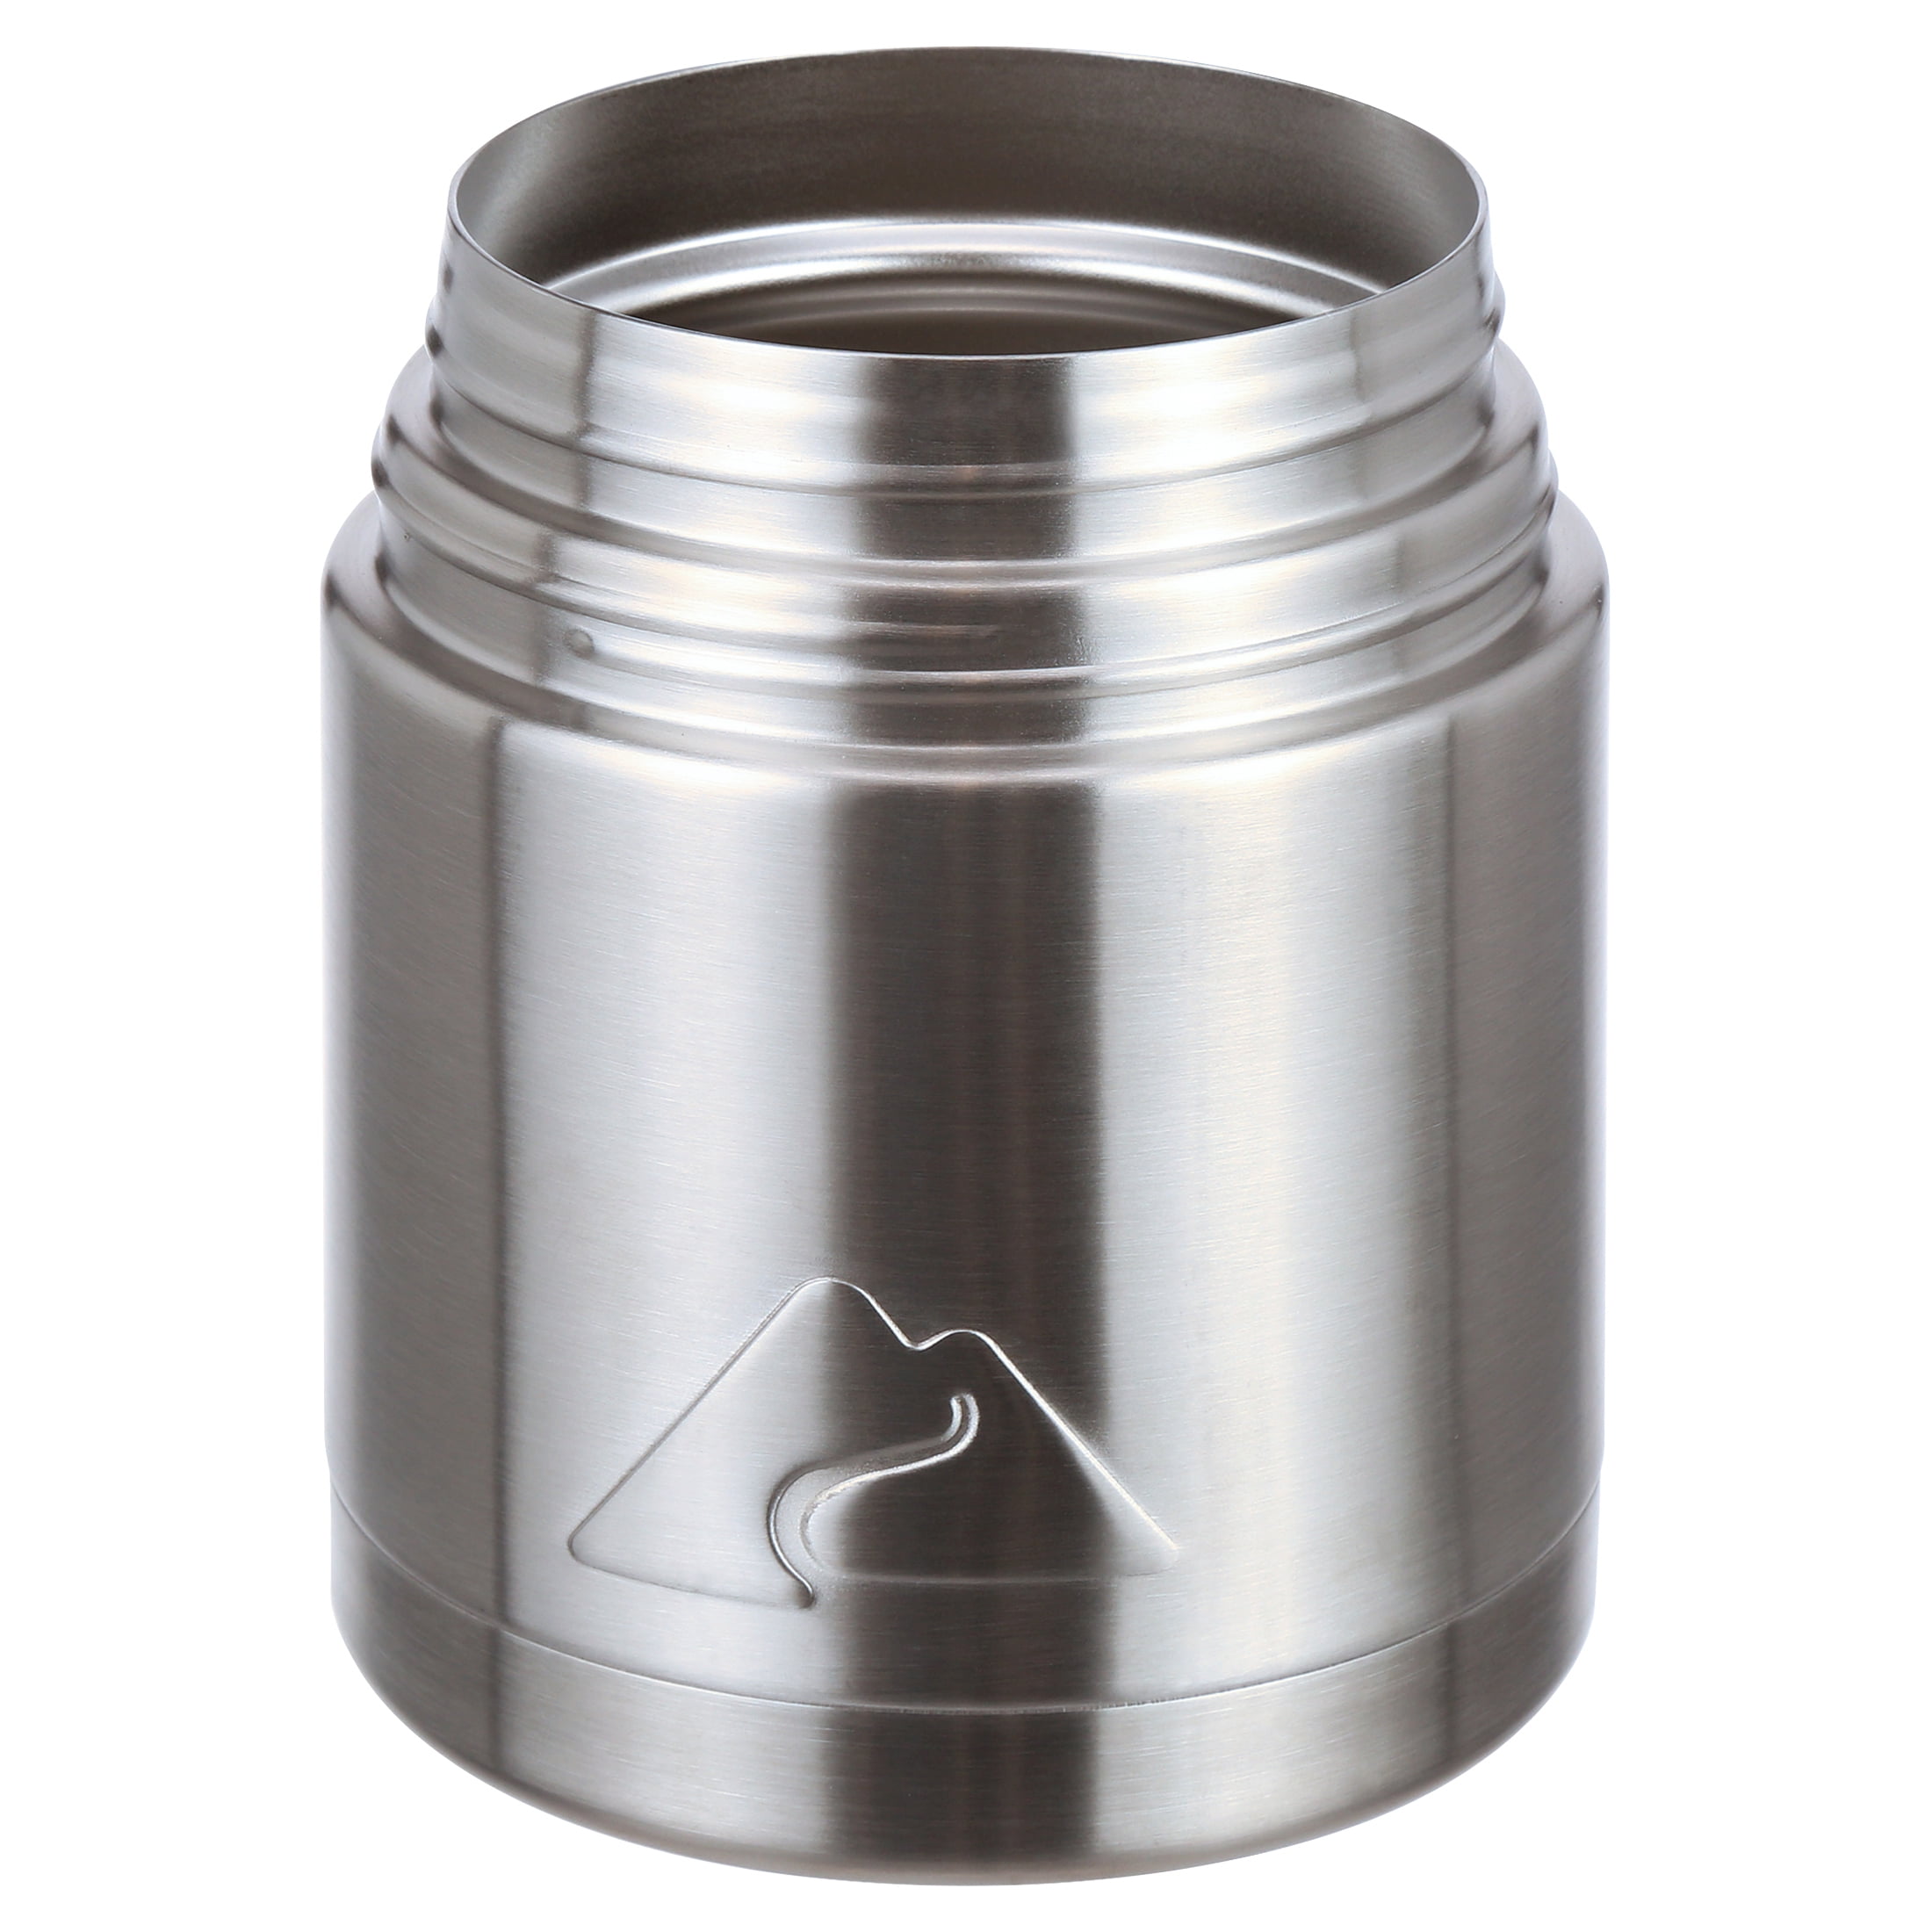 Duck House NFL 16-Oz. Double-Wall Stainless Steel Thermos